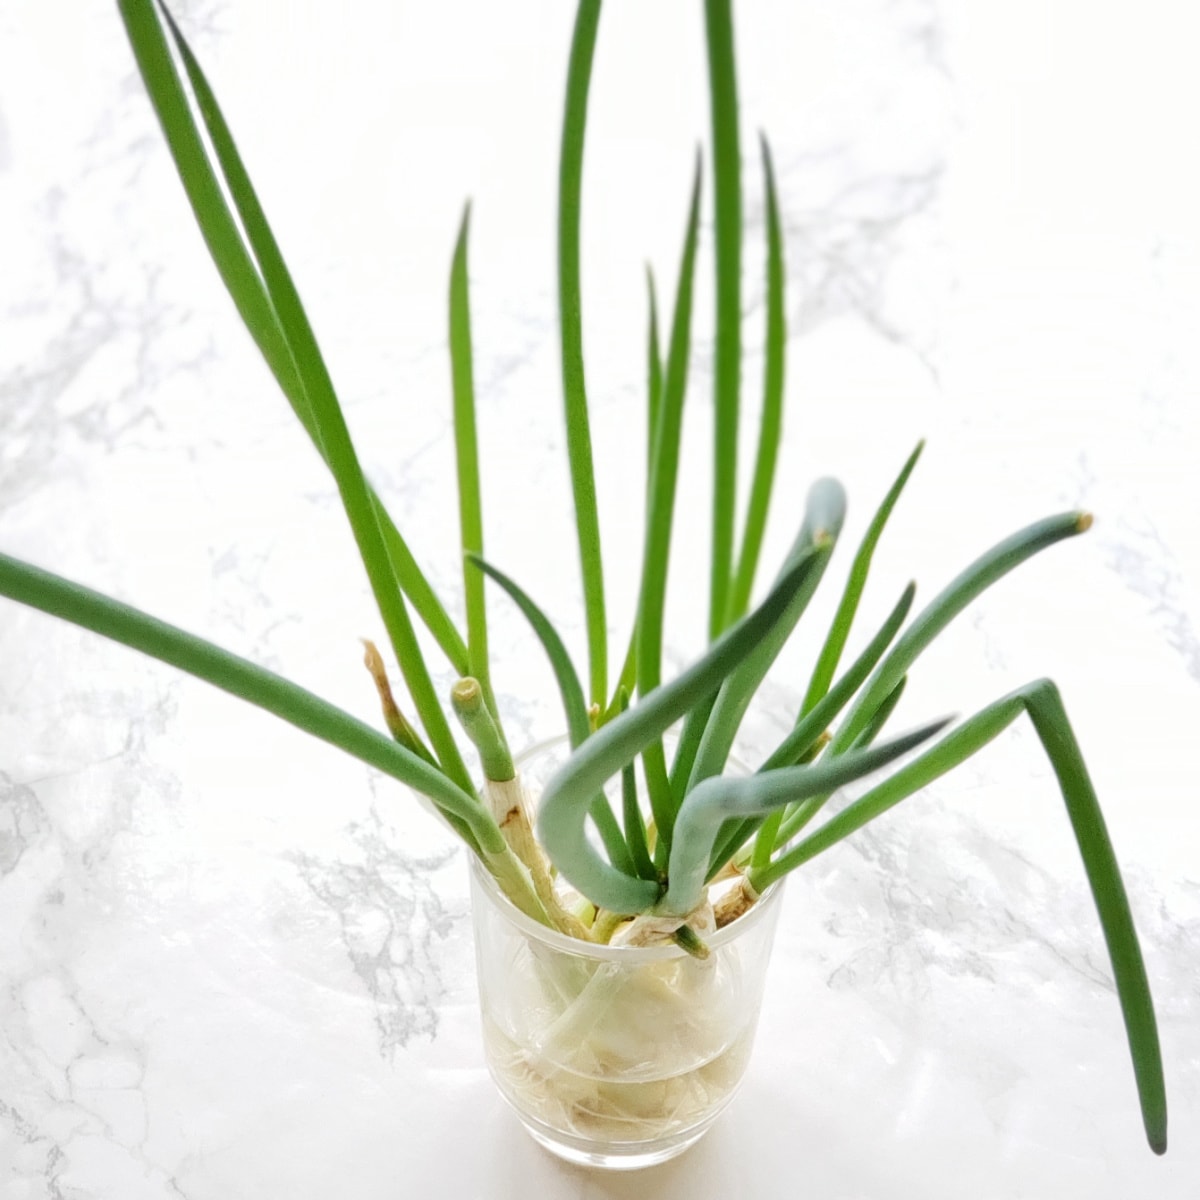 Scallions rooting in a small glass jar on a marble counter